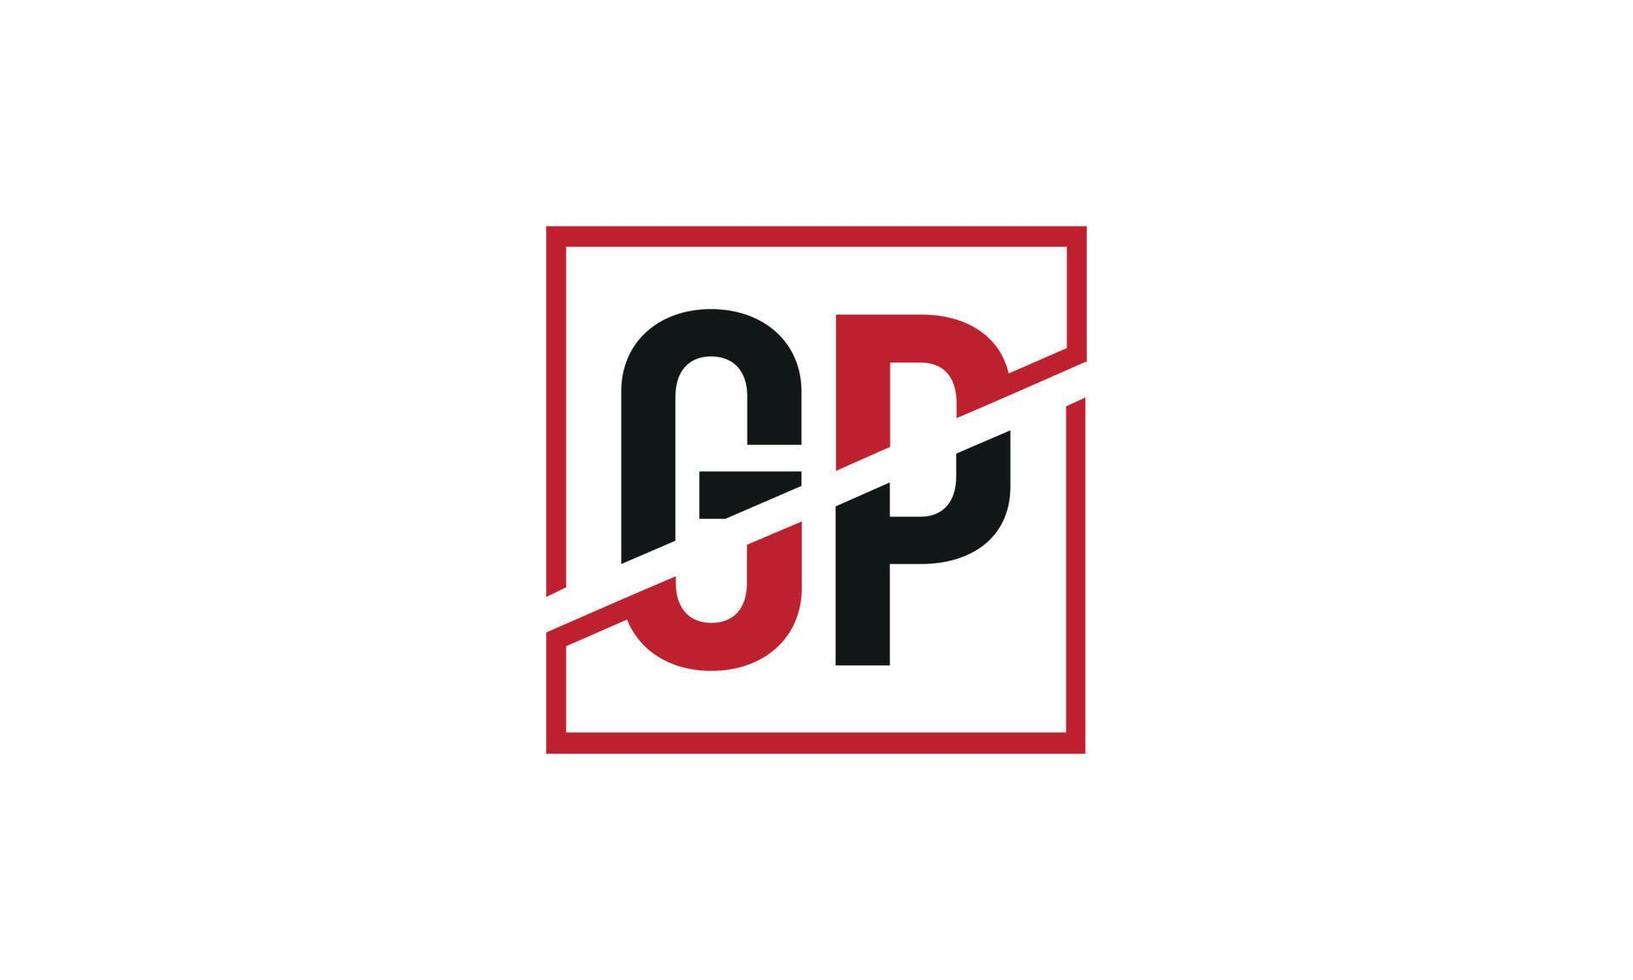 GP logo design. Initial GP letter logo monogram design in black and red color with square shape. Pro vector